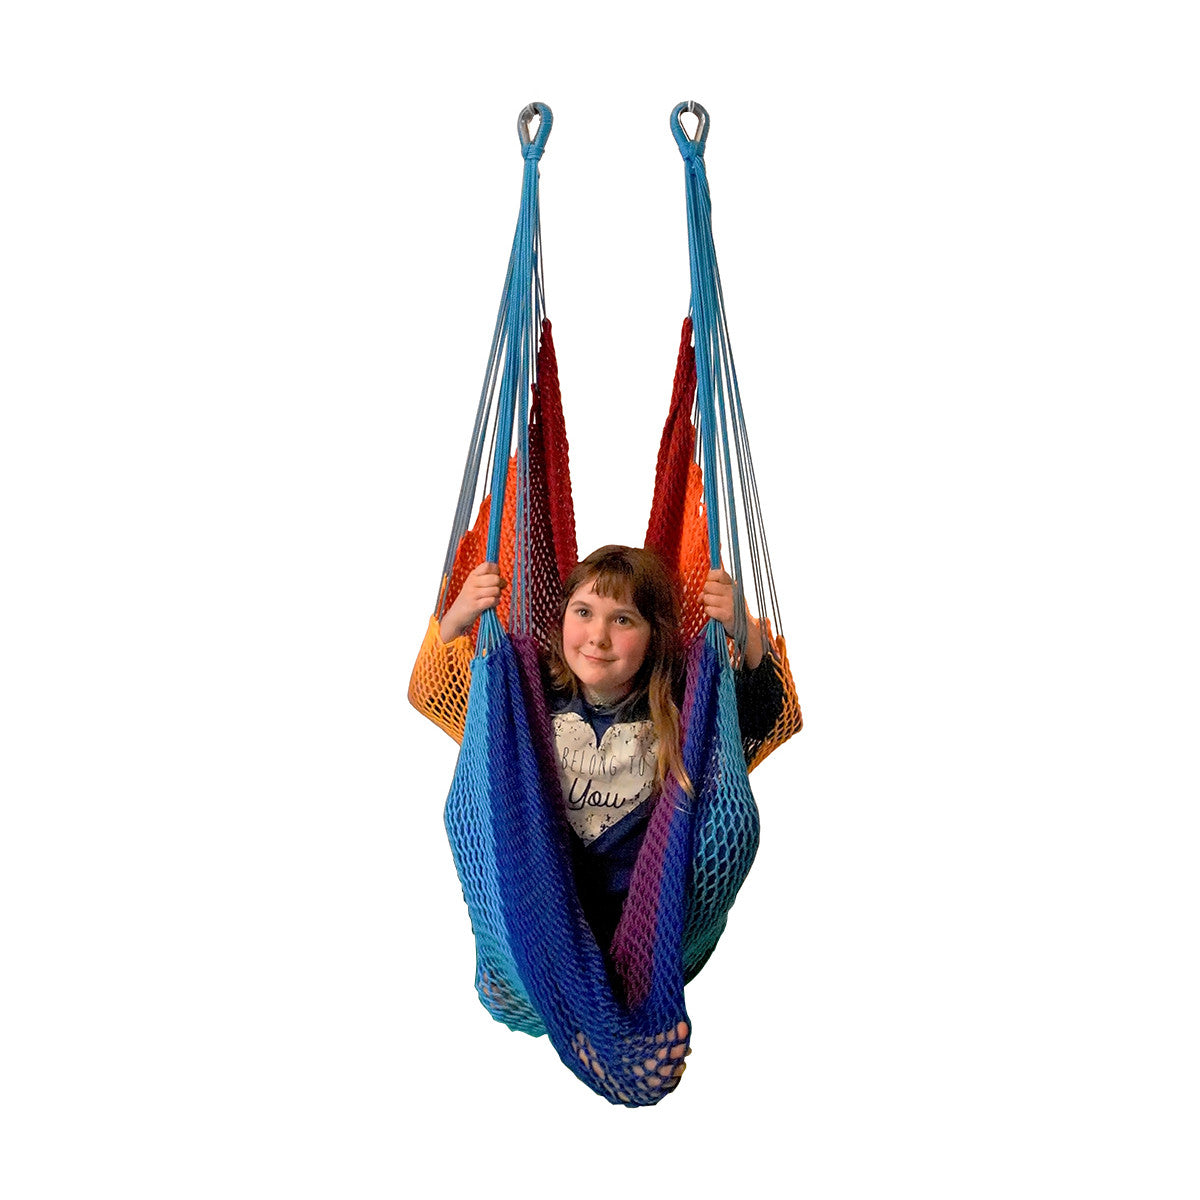 A girl is sitting in a Therapy Net Swing - Rainbow - DreamGYM